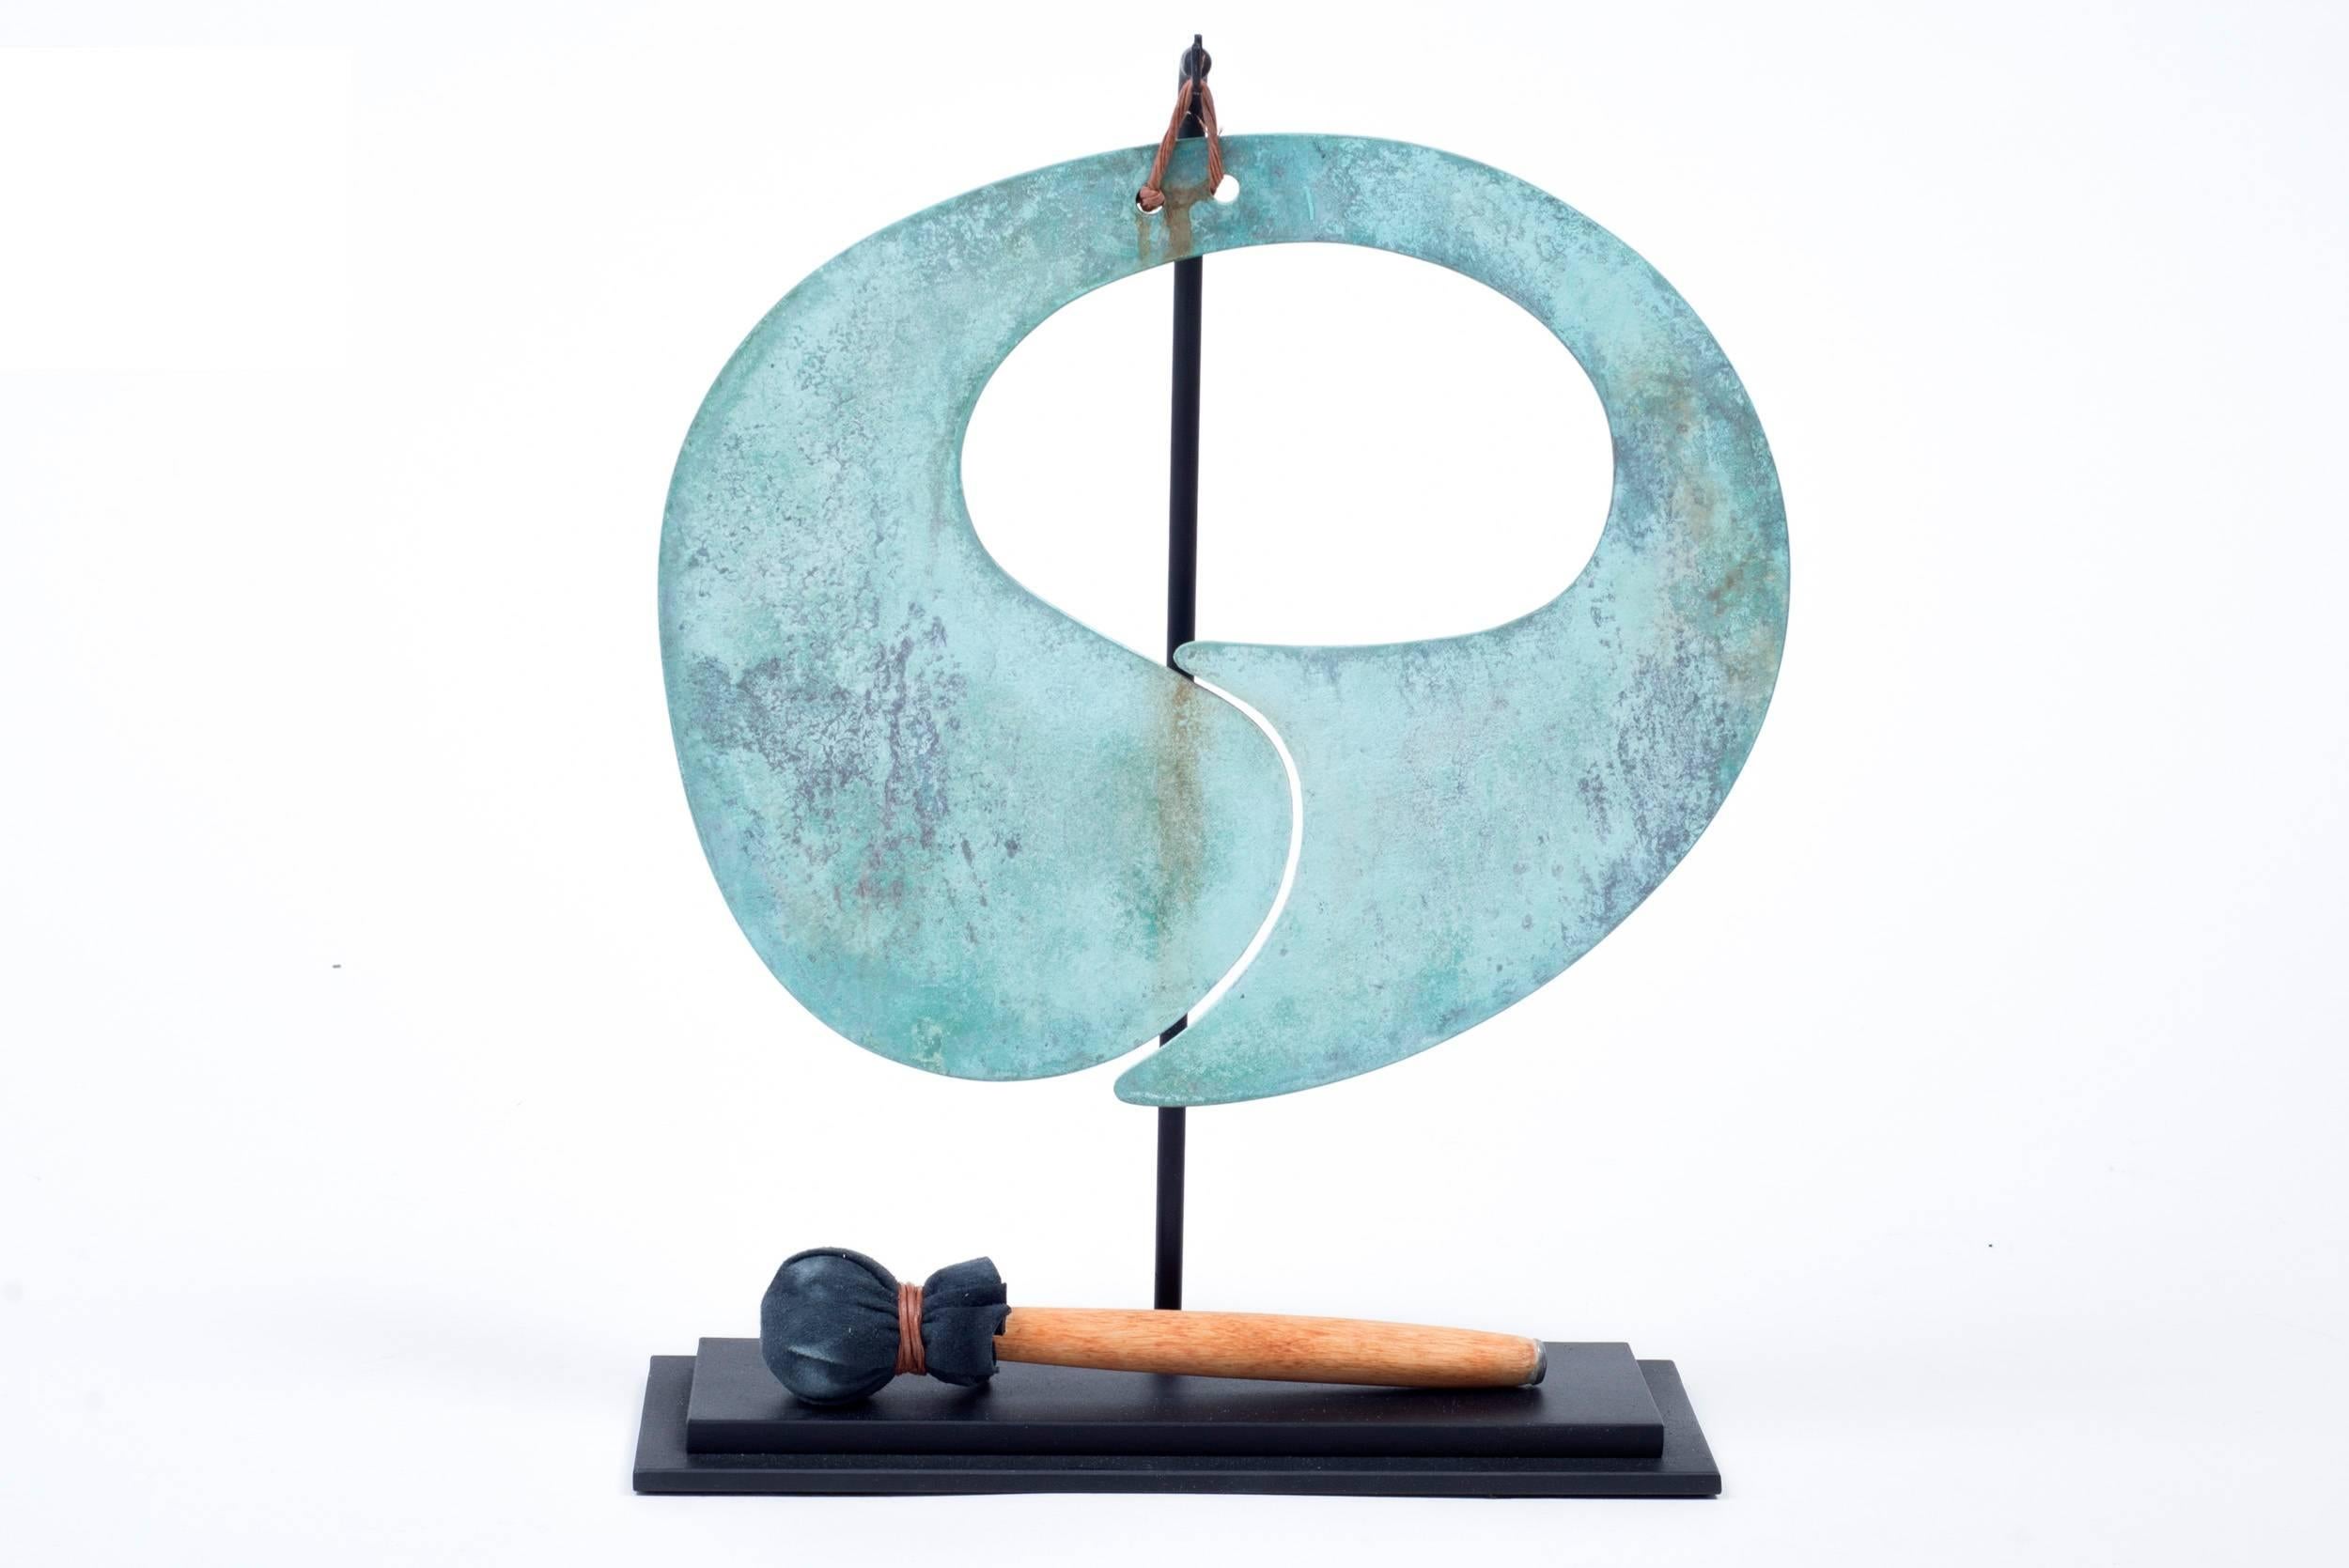 This gong has an amazingly distinctive form and an incredible patina. It is a smaller scale than the Classic solid bronze gongs he created. It comes with a Stand and mallet of appropriate scale.